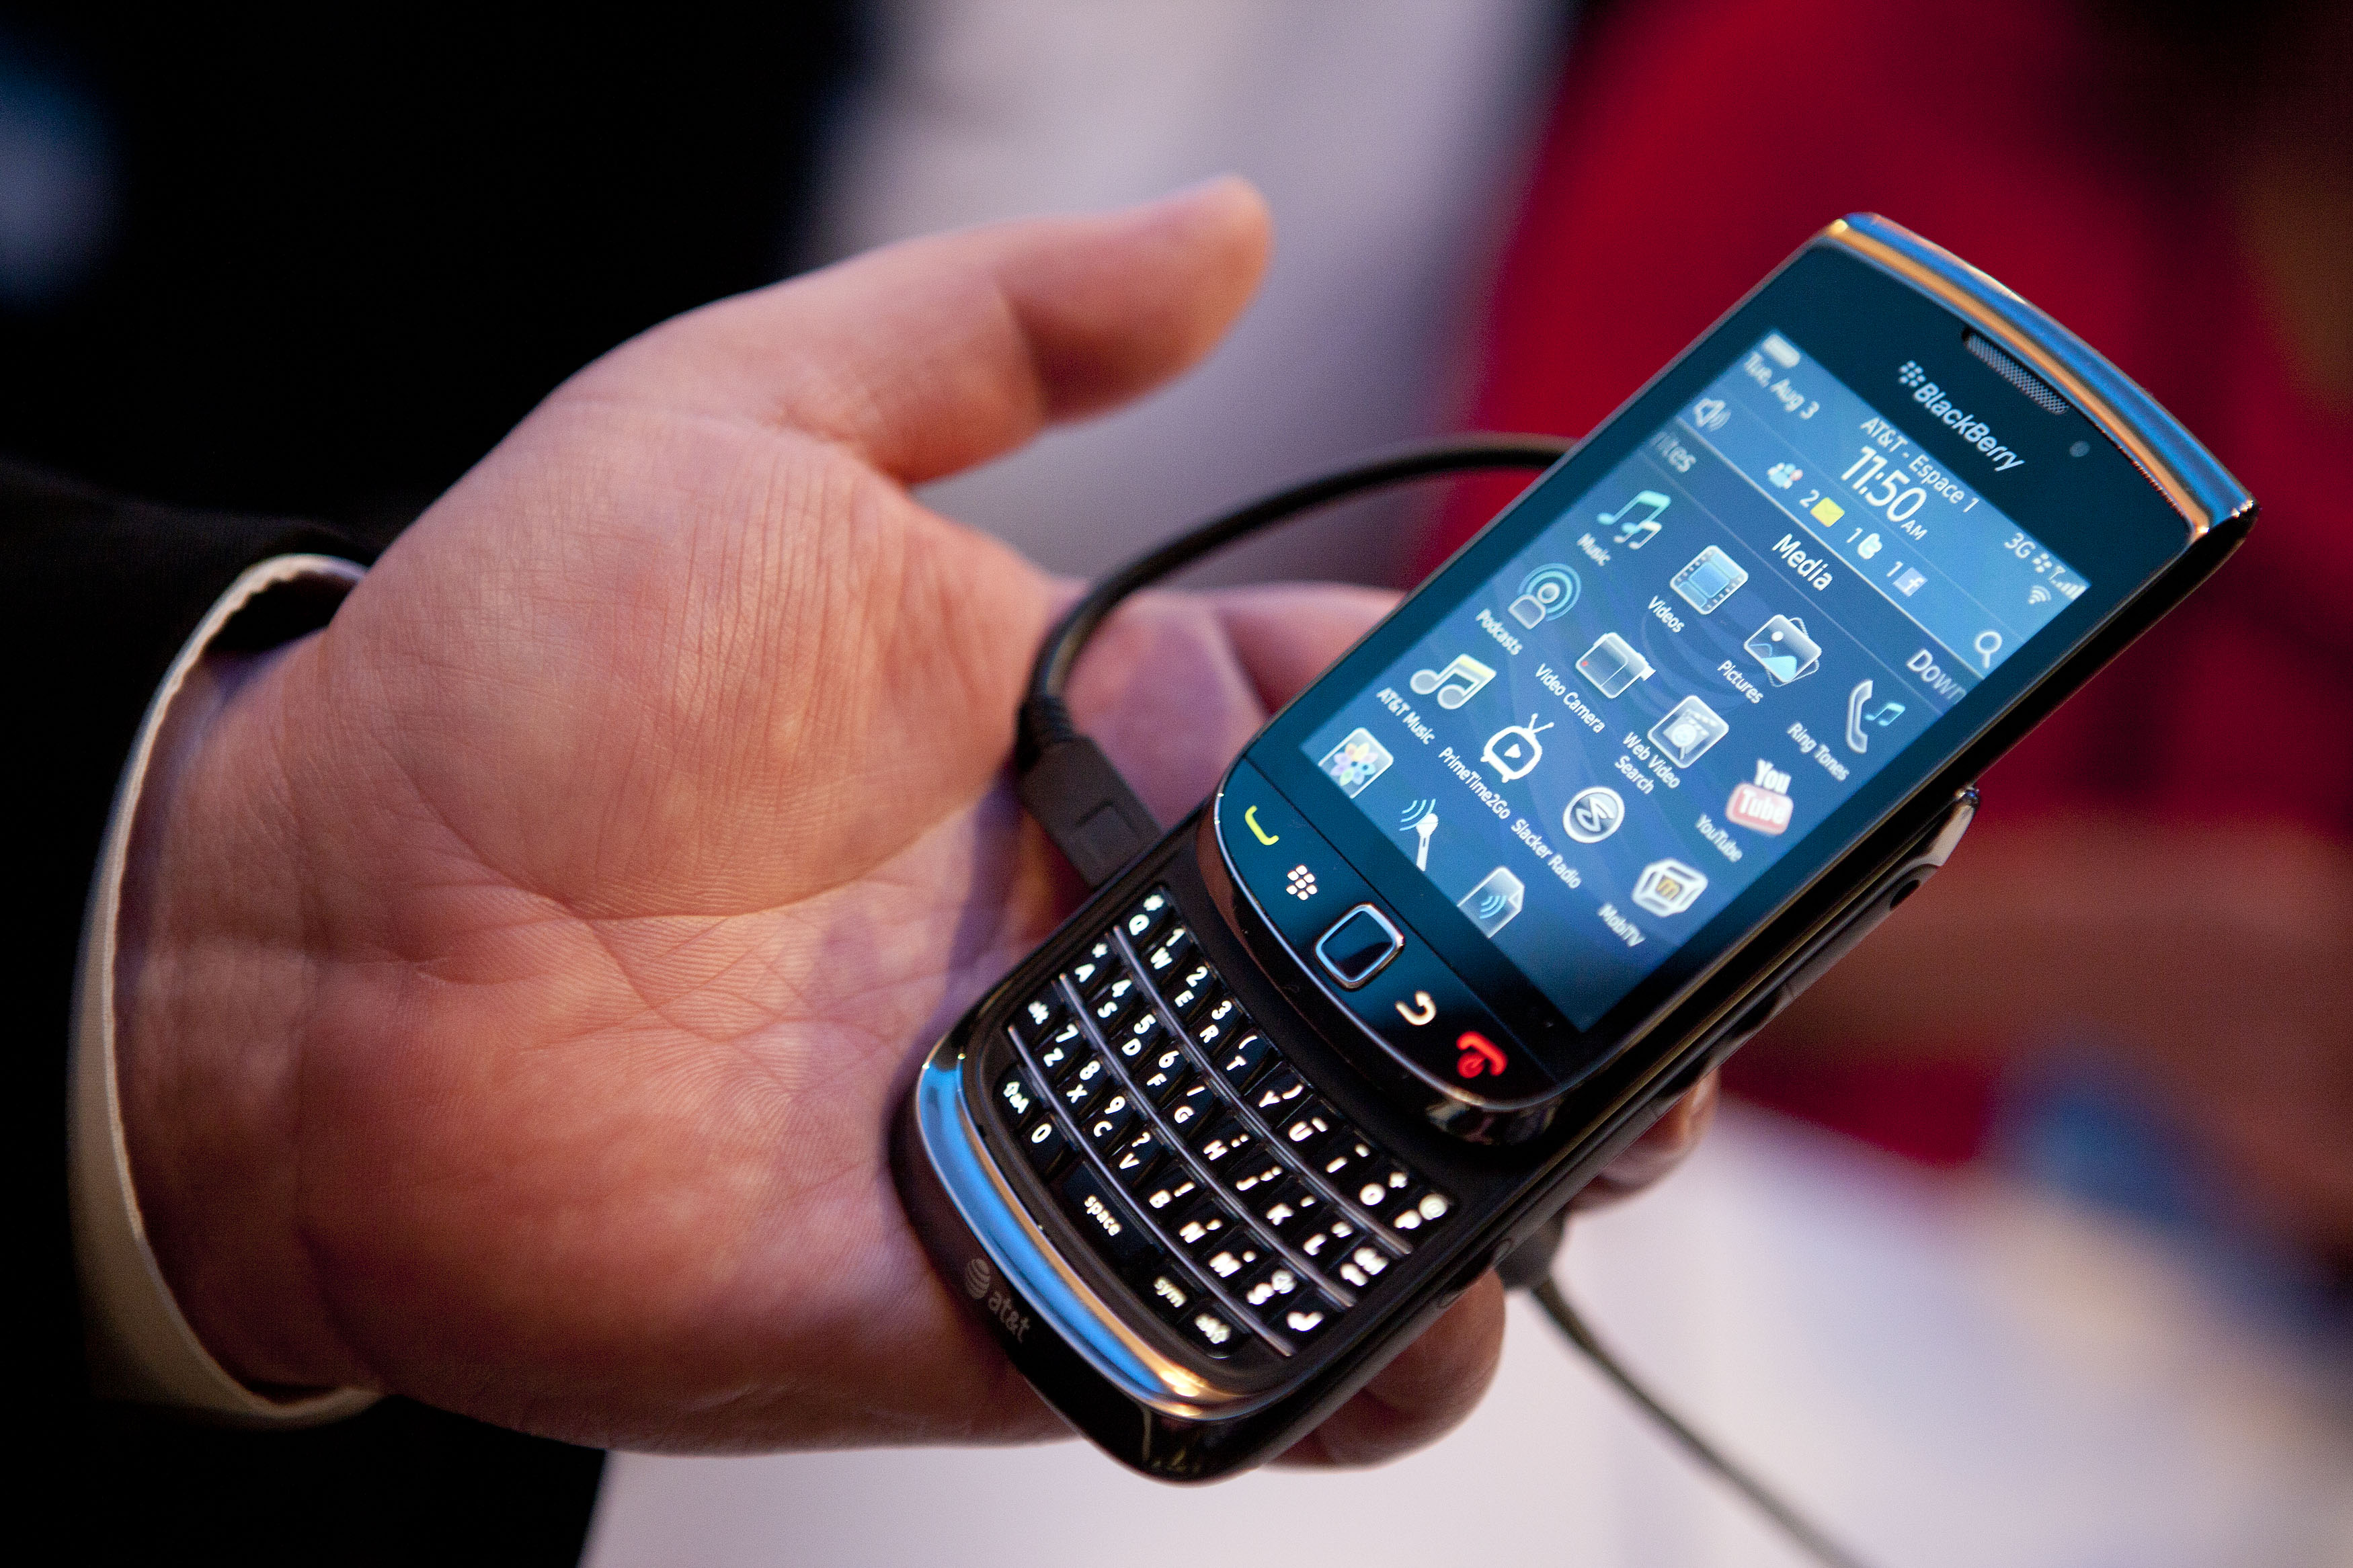 end of the line finally coming for blackberry devices | ars technica